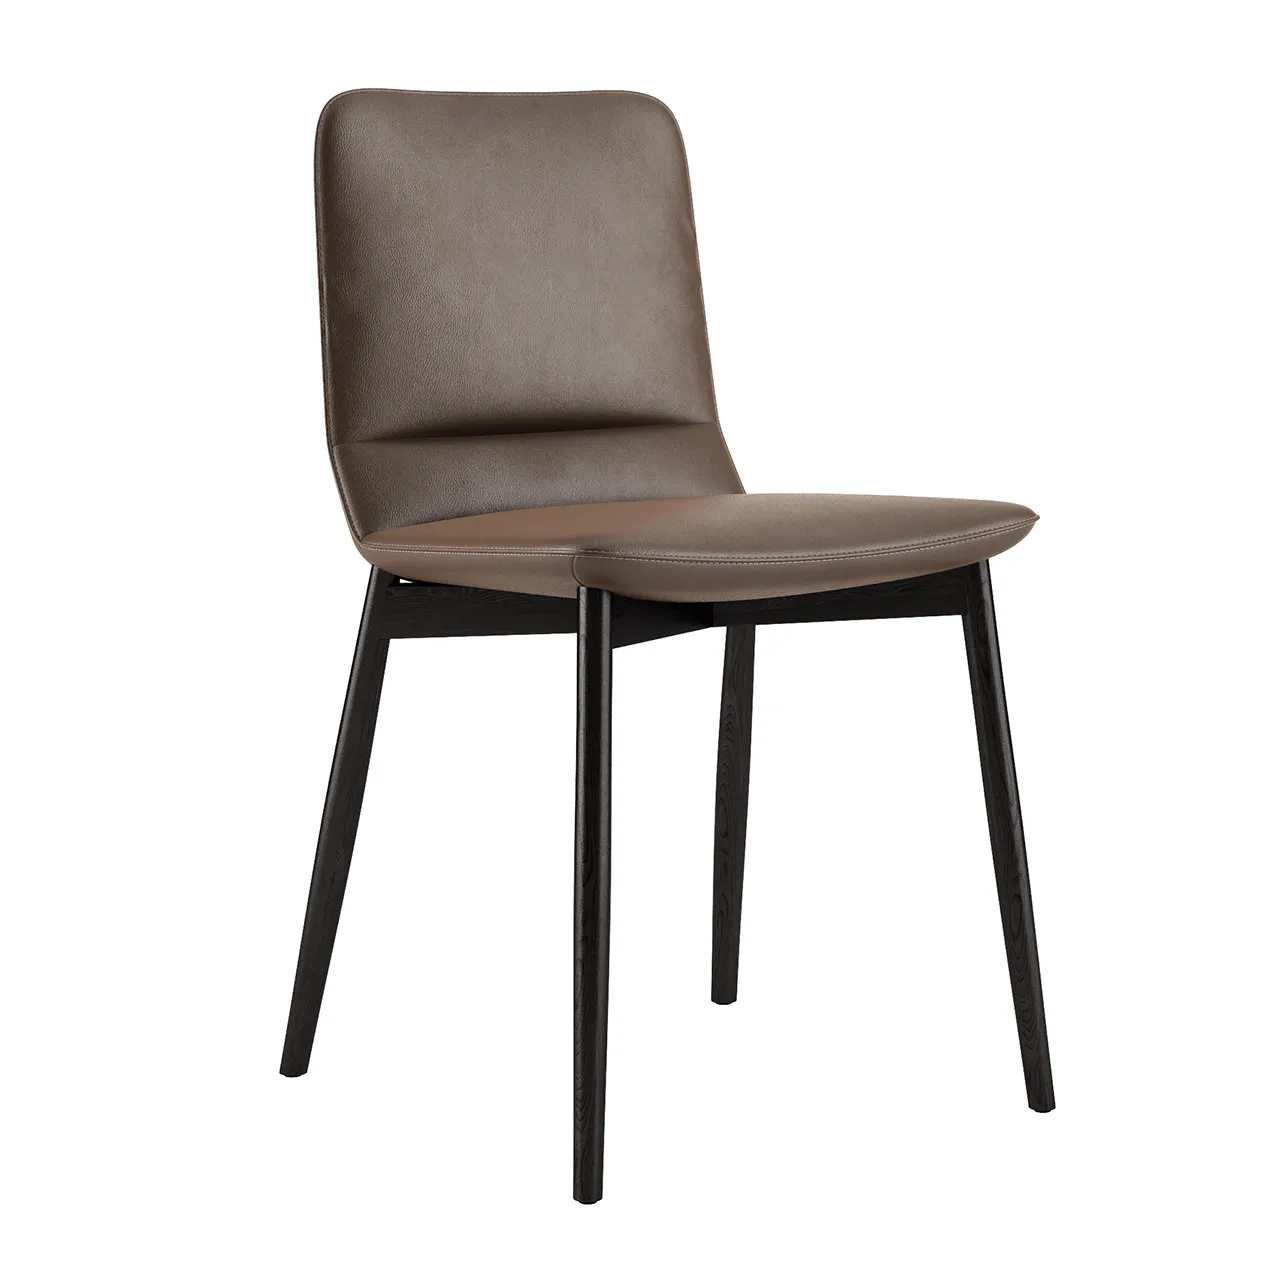 Furniture – bend-chair-by-ligne-roset